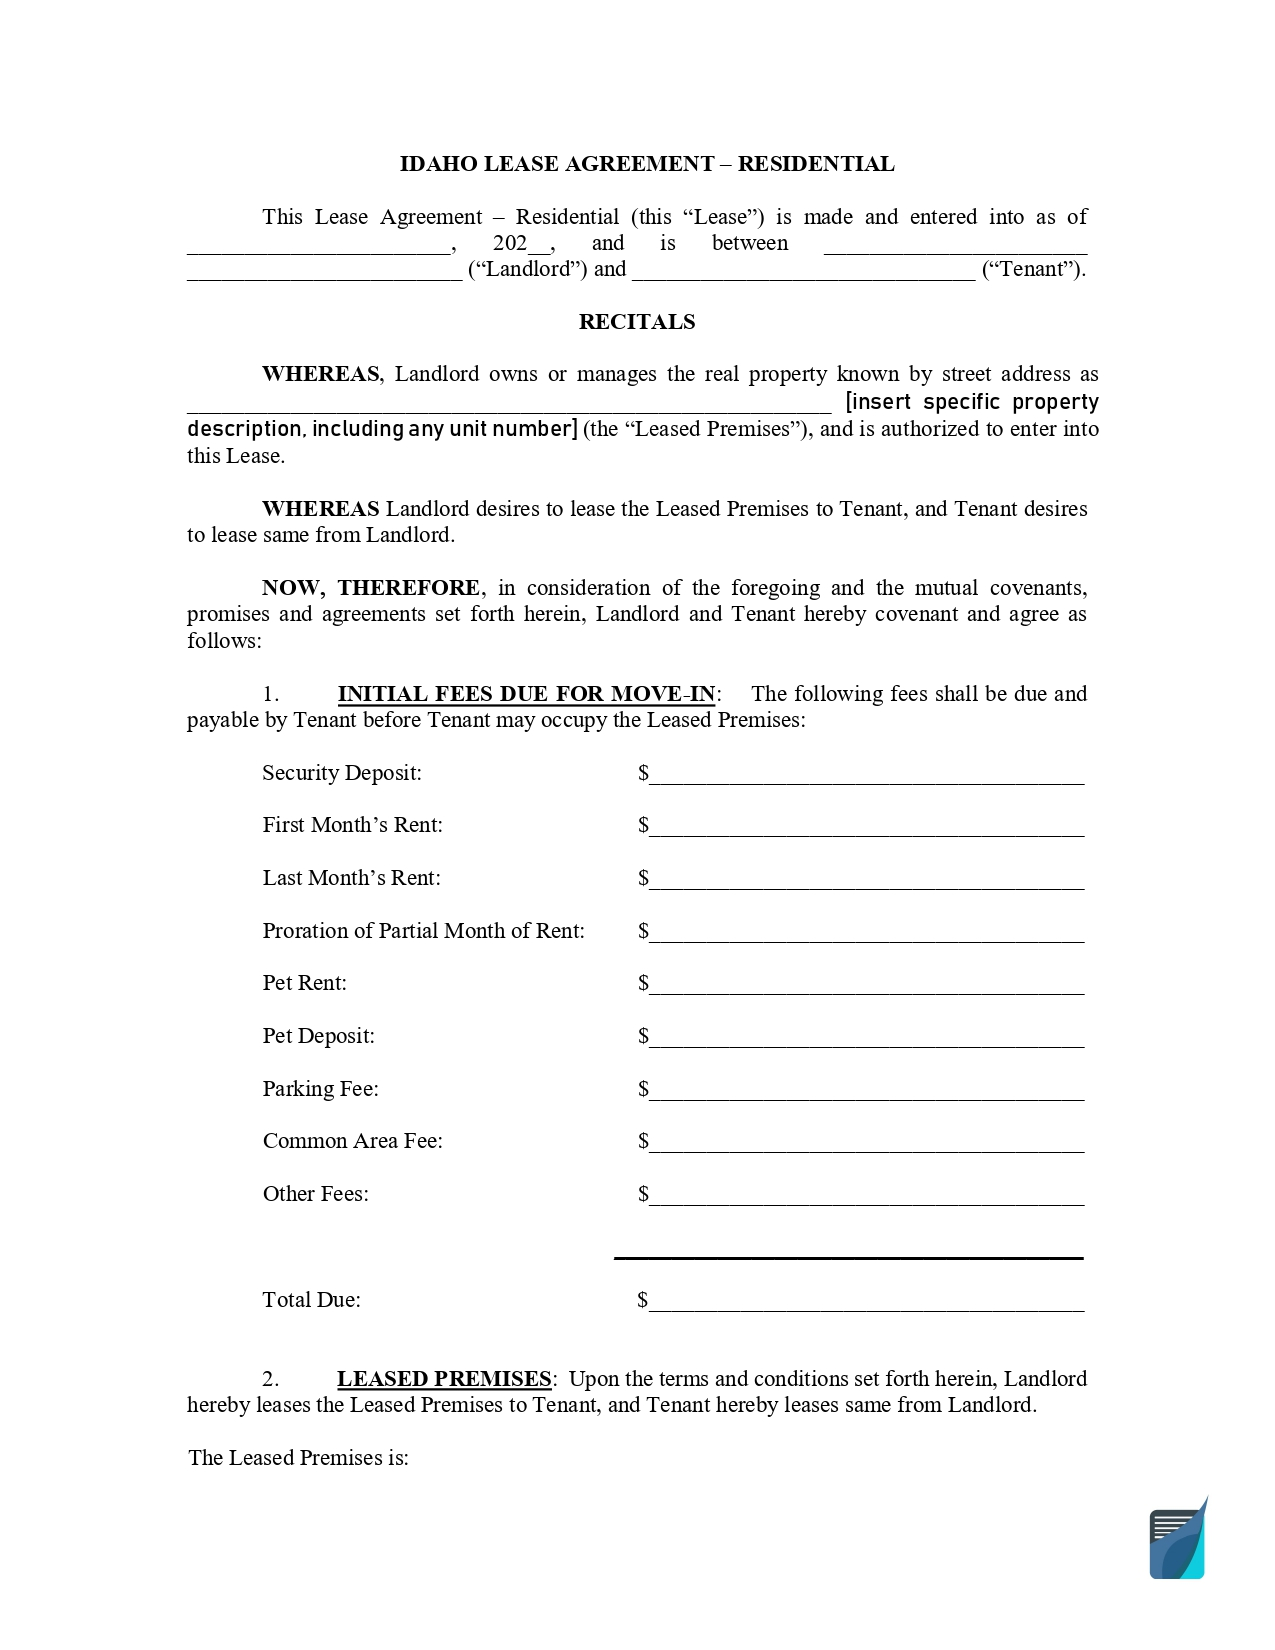 Idaho-Lease-Agreement-Residential-Form